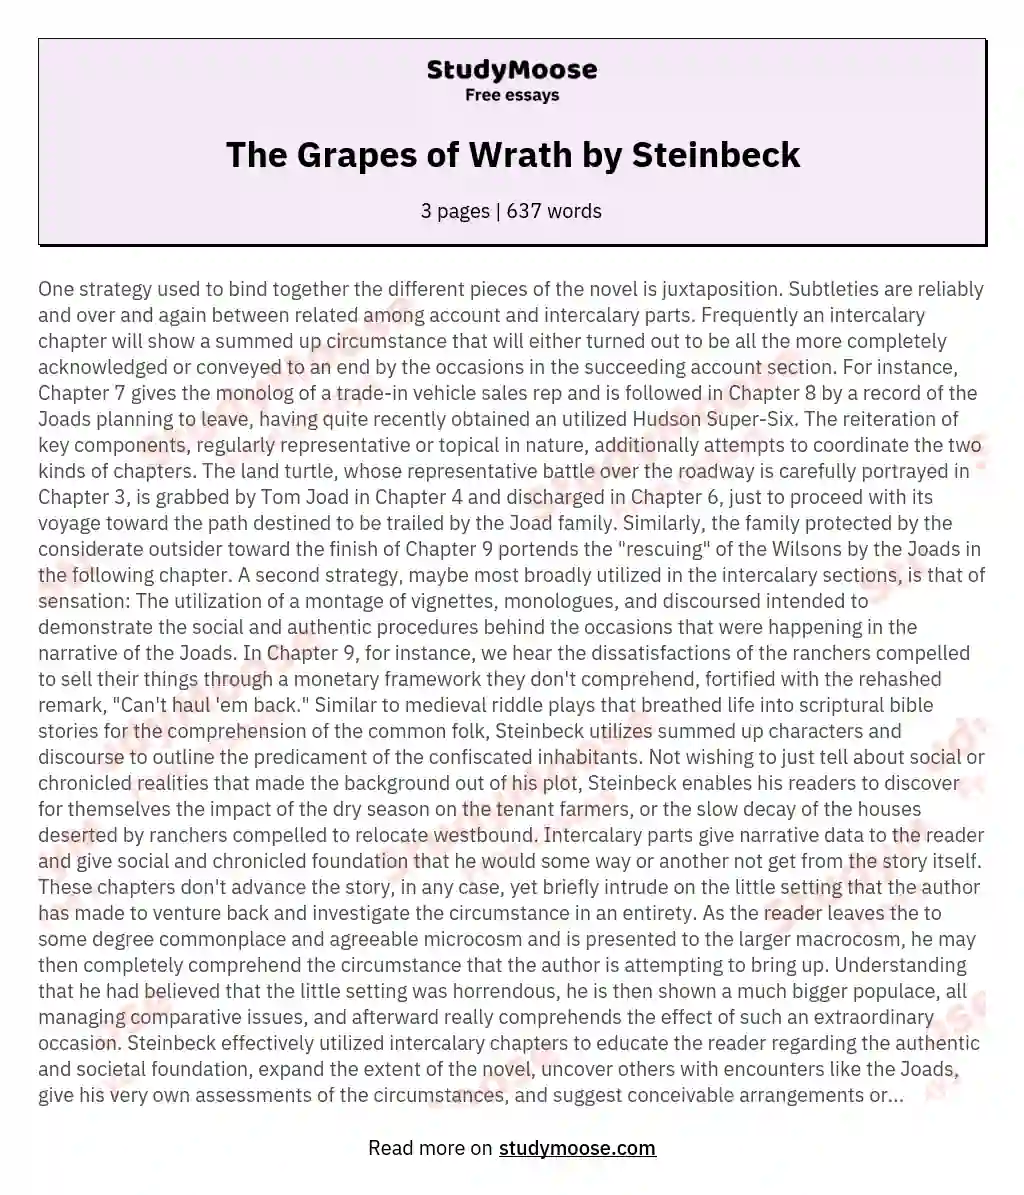 The Grapes of Wrath by Steinbeck